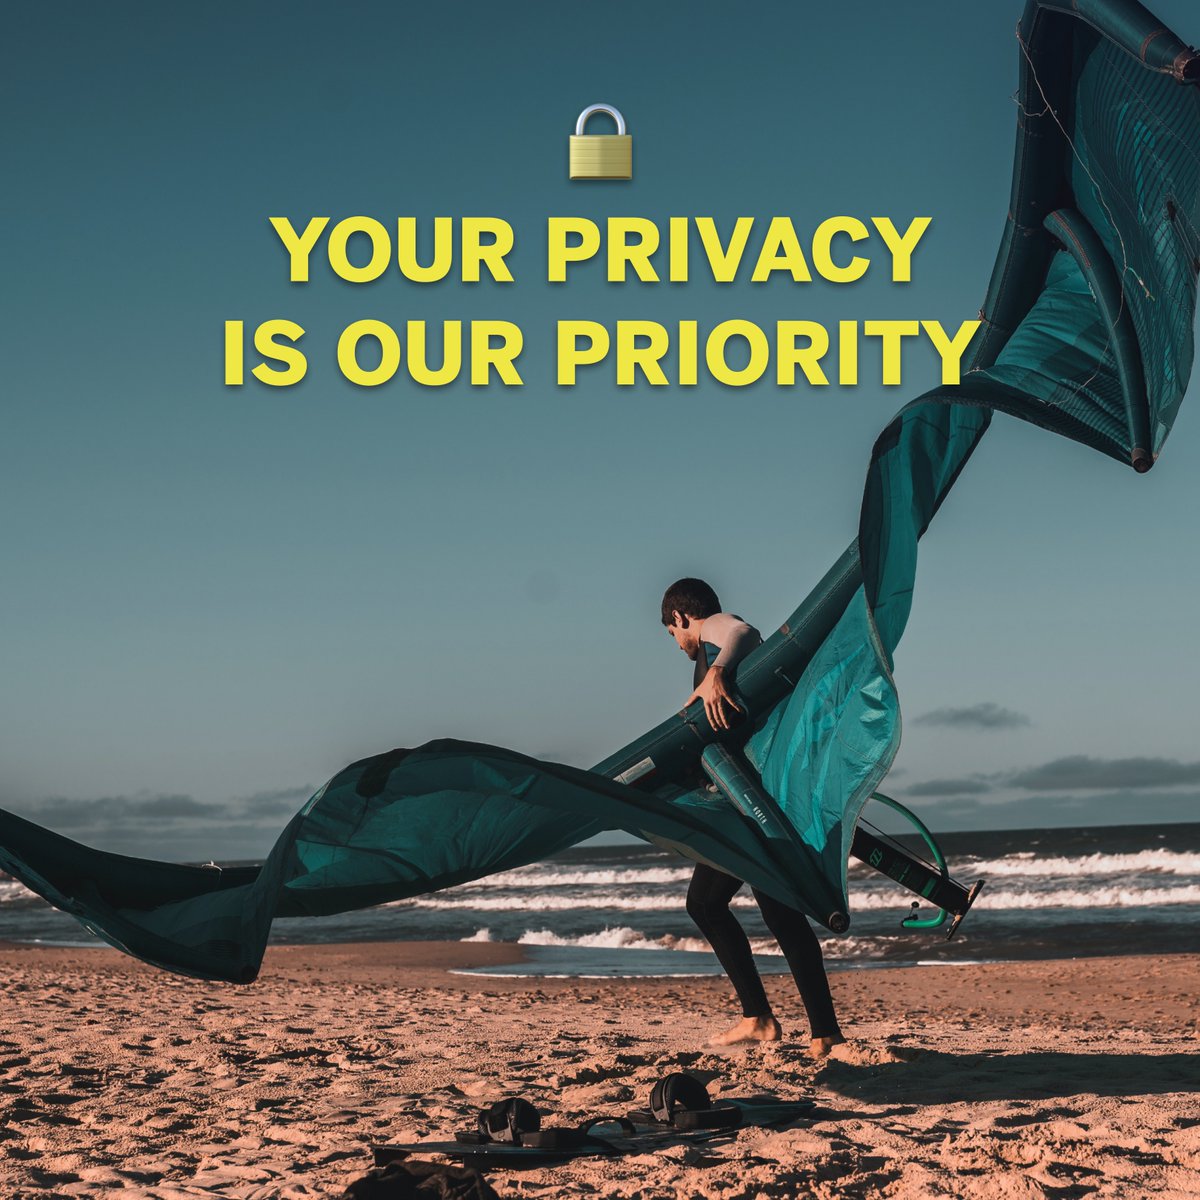 🌊🖥️ Discover KitePlanner - the kitesurfing planning web application that respects your privacy! With KitePlanner, simplicity is the name of the game - we only need two pieces of information to help you plan your kitesurfing sessions in the best possible way
#kitesurf #privacy